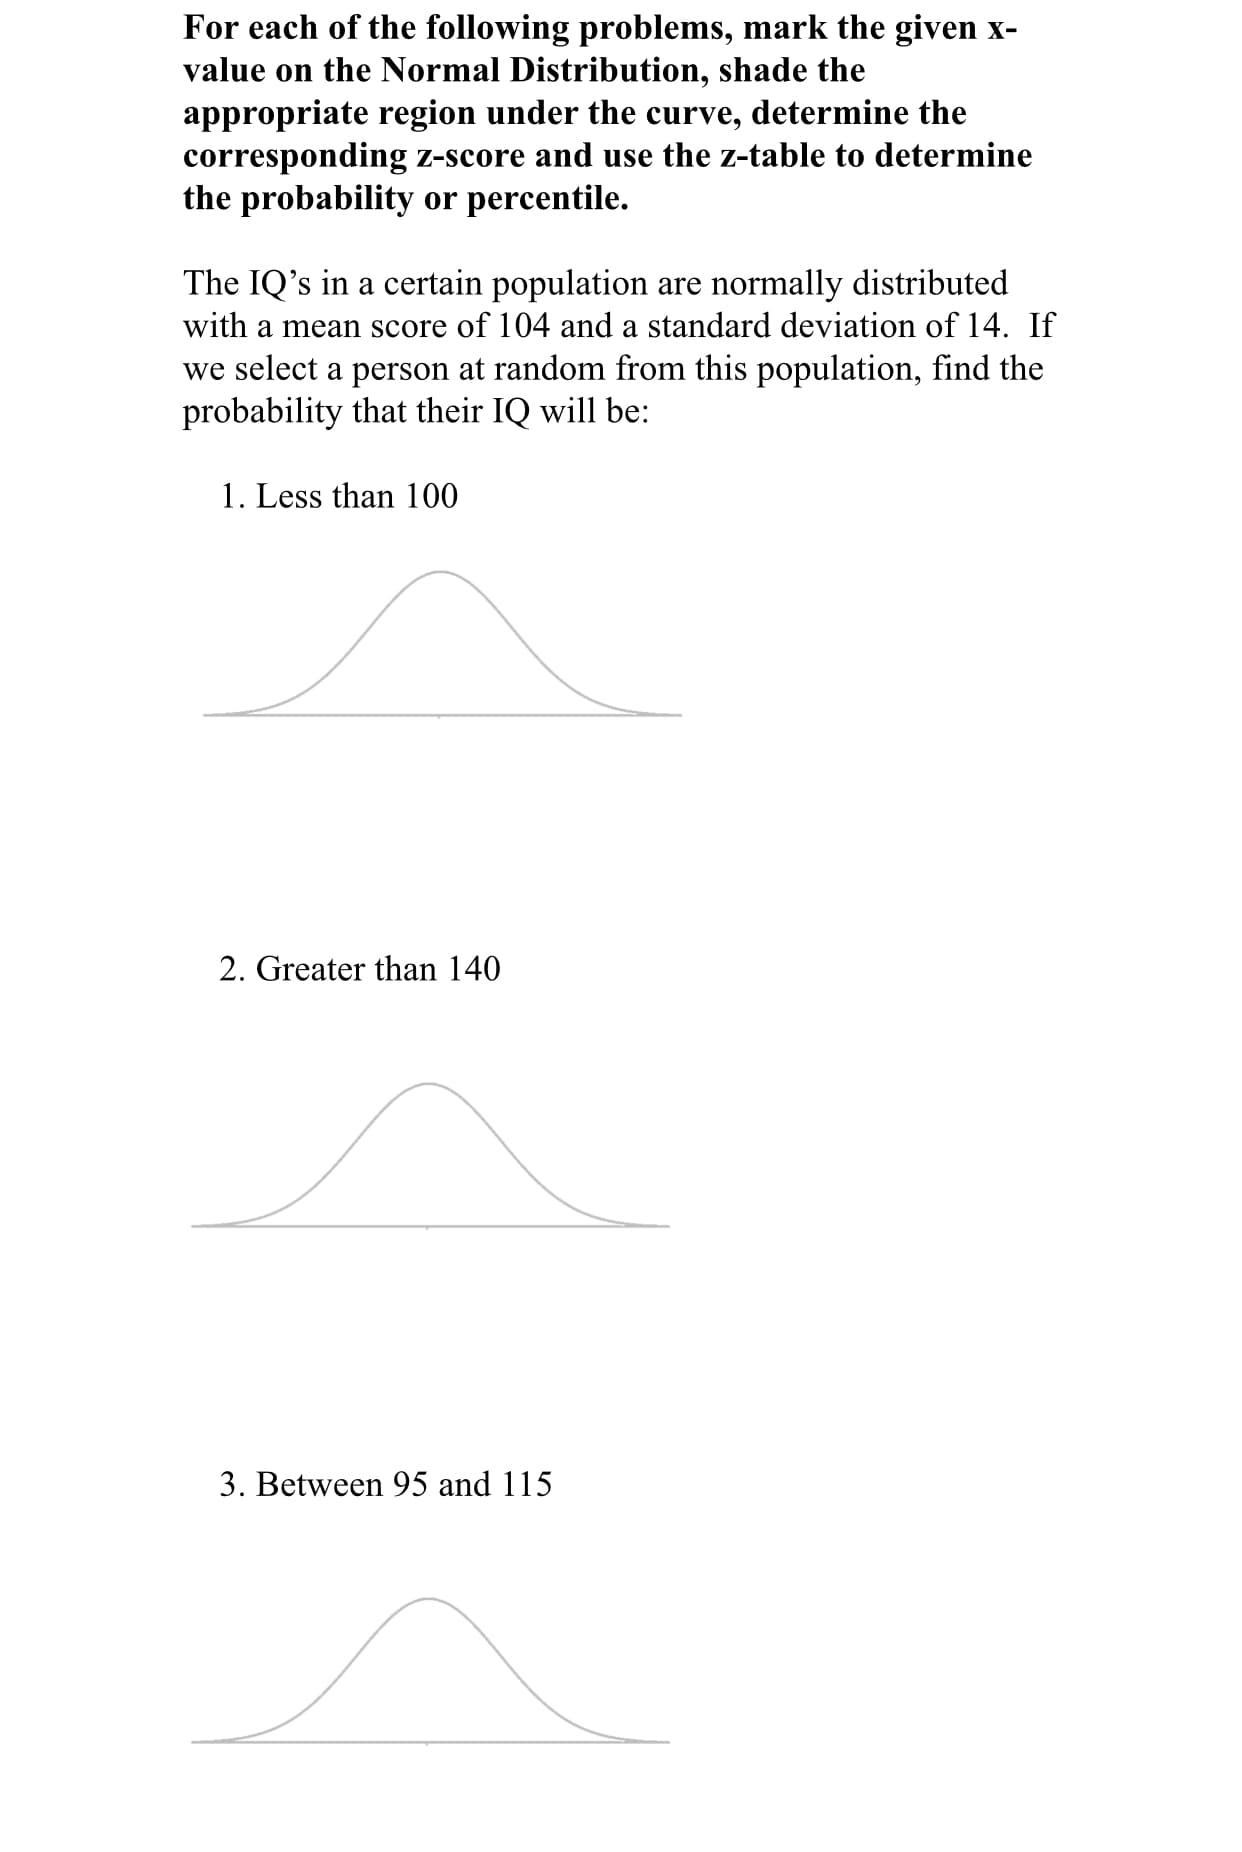 For each of the following problems, mark the given x-
value on the Normal Distribution, shade the
appropriate region under the curve, determine the
corresponding z-score and use the z-table to determine
the probability or percentile.
The IQ's in a certain population are normally distributed
with a mean score of 104 and a standard deviation of 14. If
we select a person at random from this population, find the
probability that their IQ will be:
1. Less than 100
2. Greater than 140
3. Between 95 and 115
